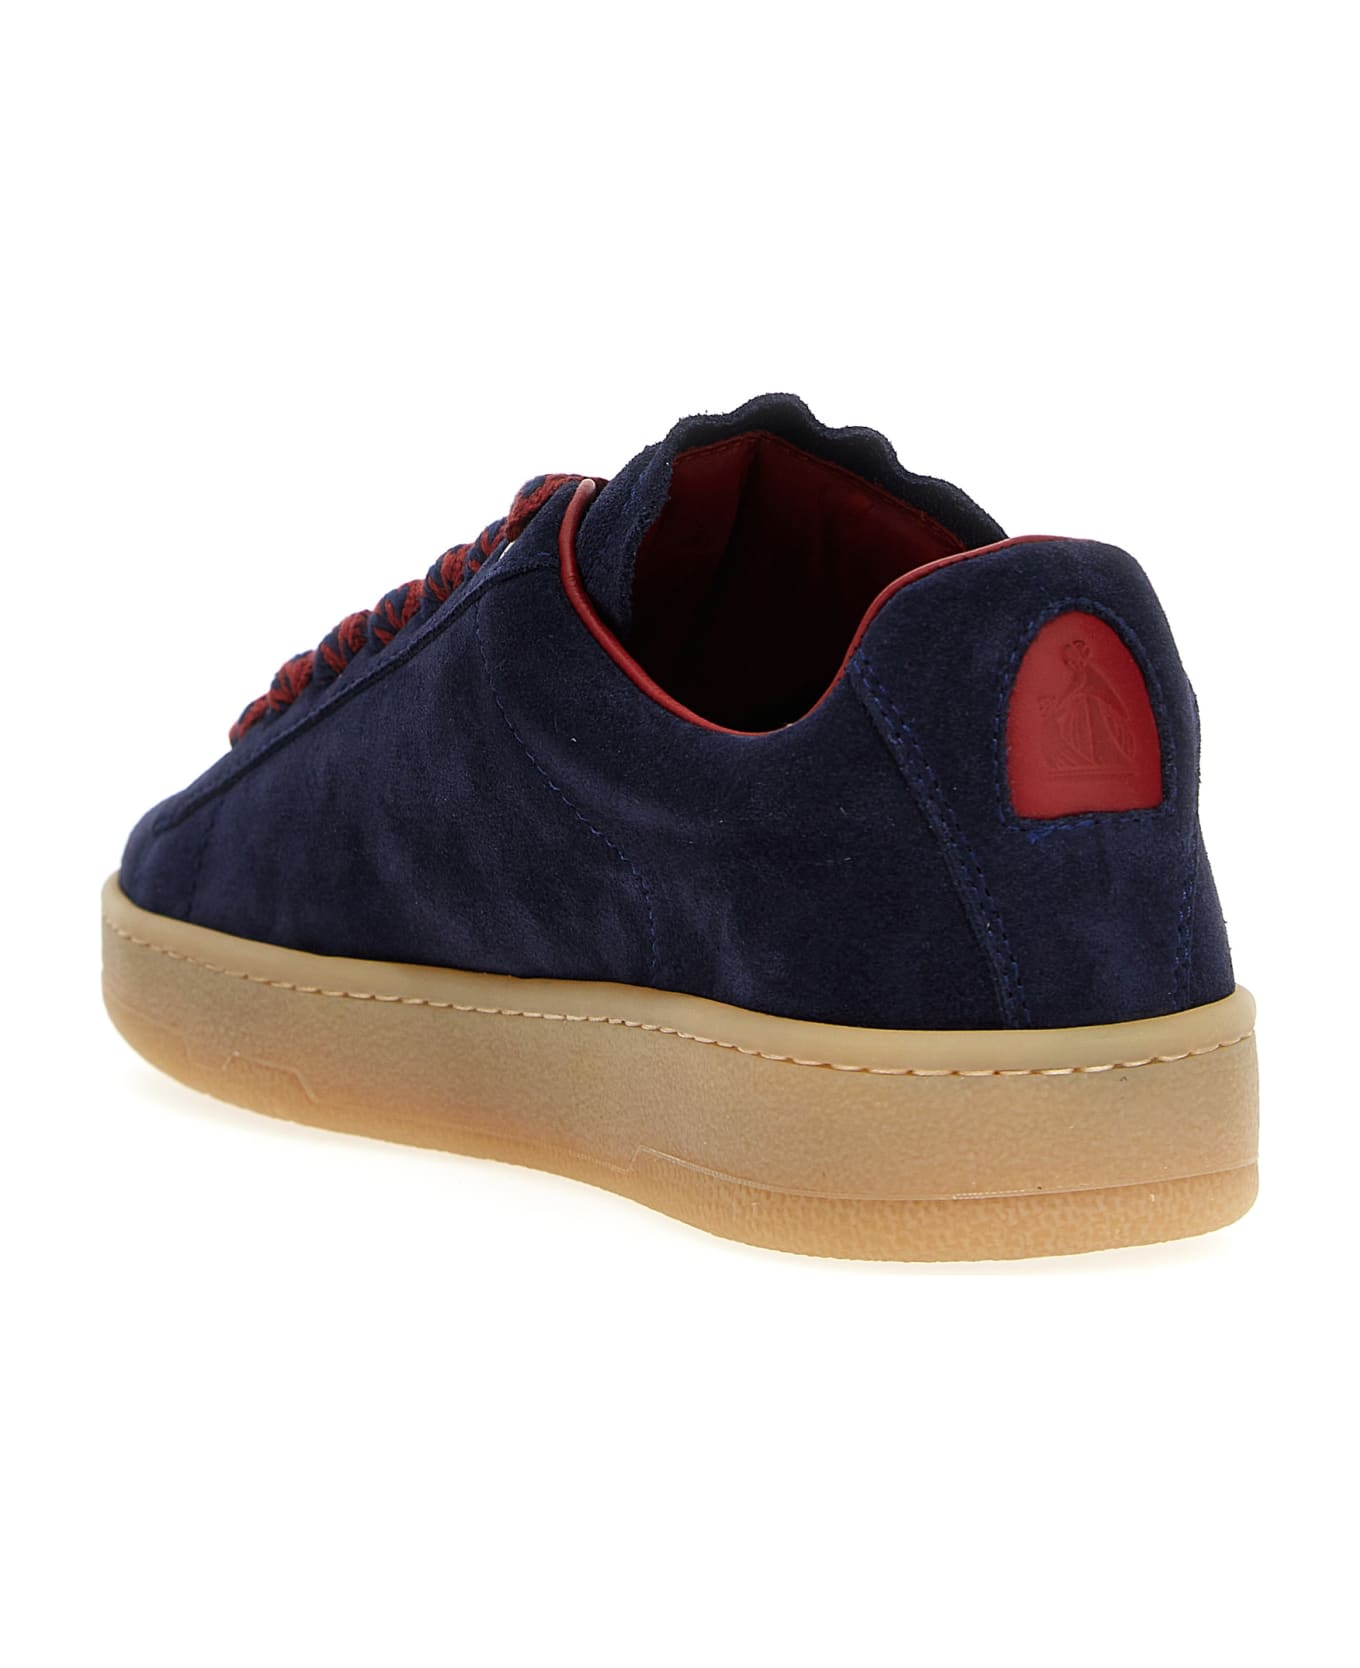 Lanvin 'lite Curb' Sneakers - Navy Blue/red